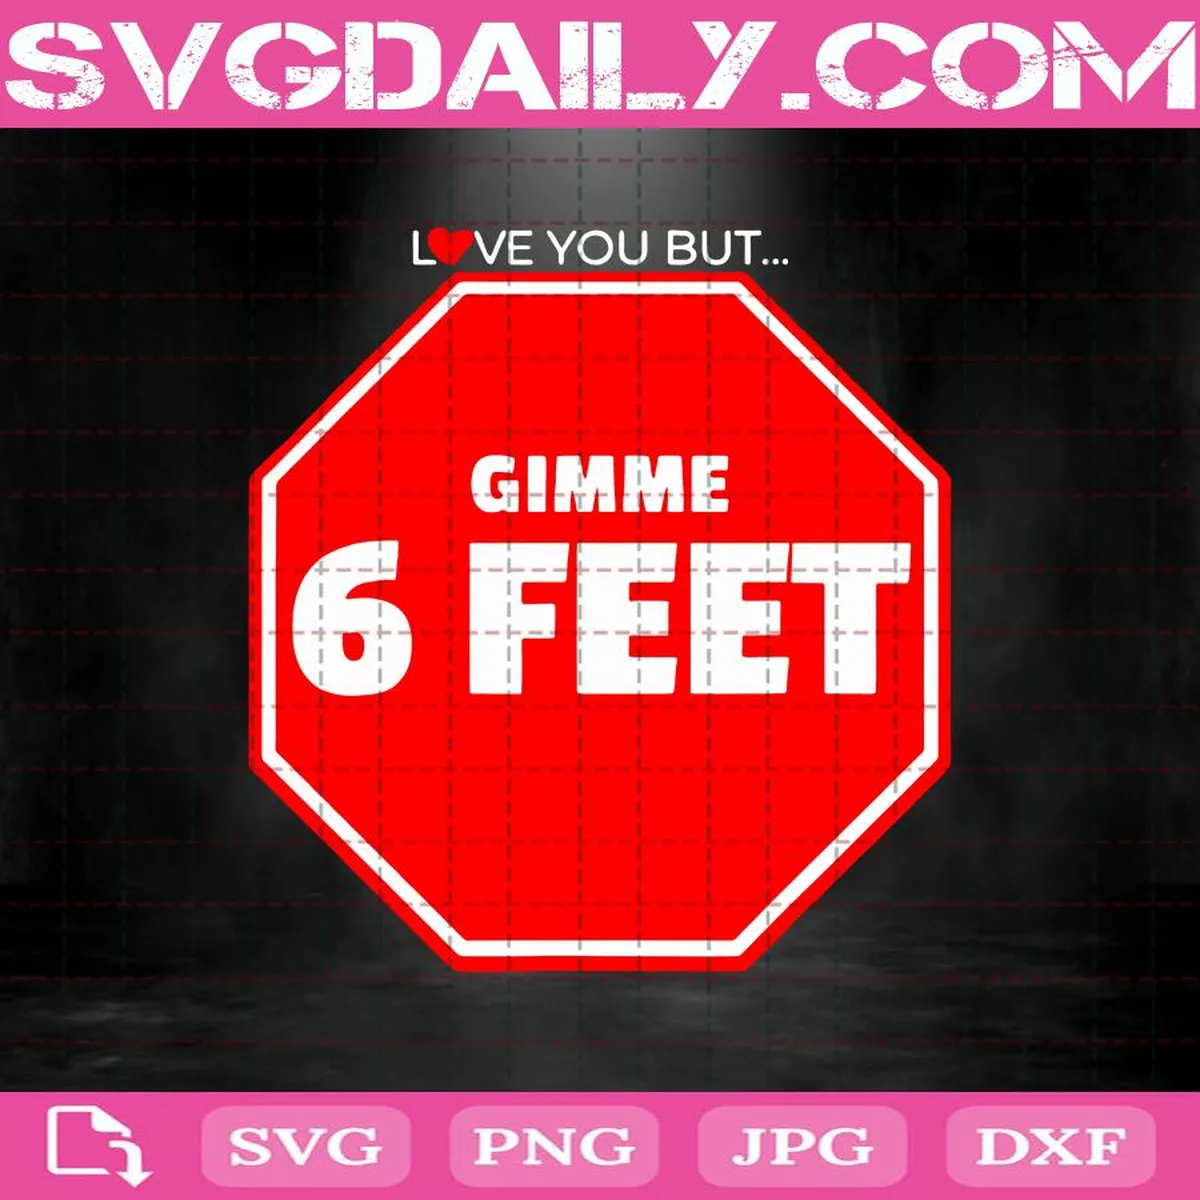 Love You But Gimme 6 Feet Svg, Social Distance Svg, Quarantine Svg, 6 Feet Svg, Gimme 6 Feet Svg, Svg Png Dxf Eps